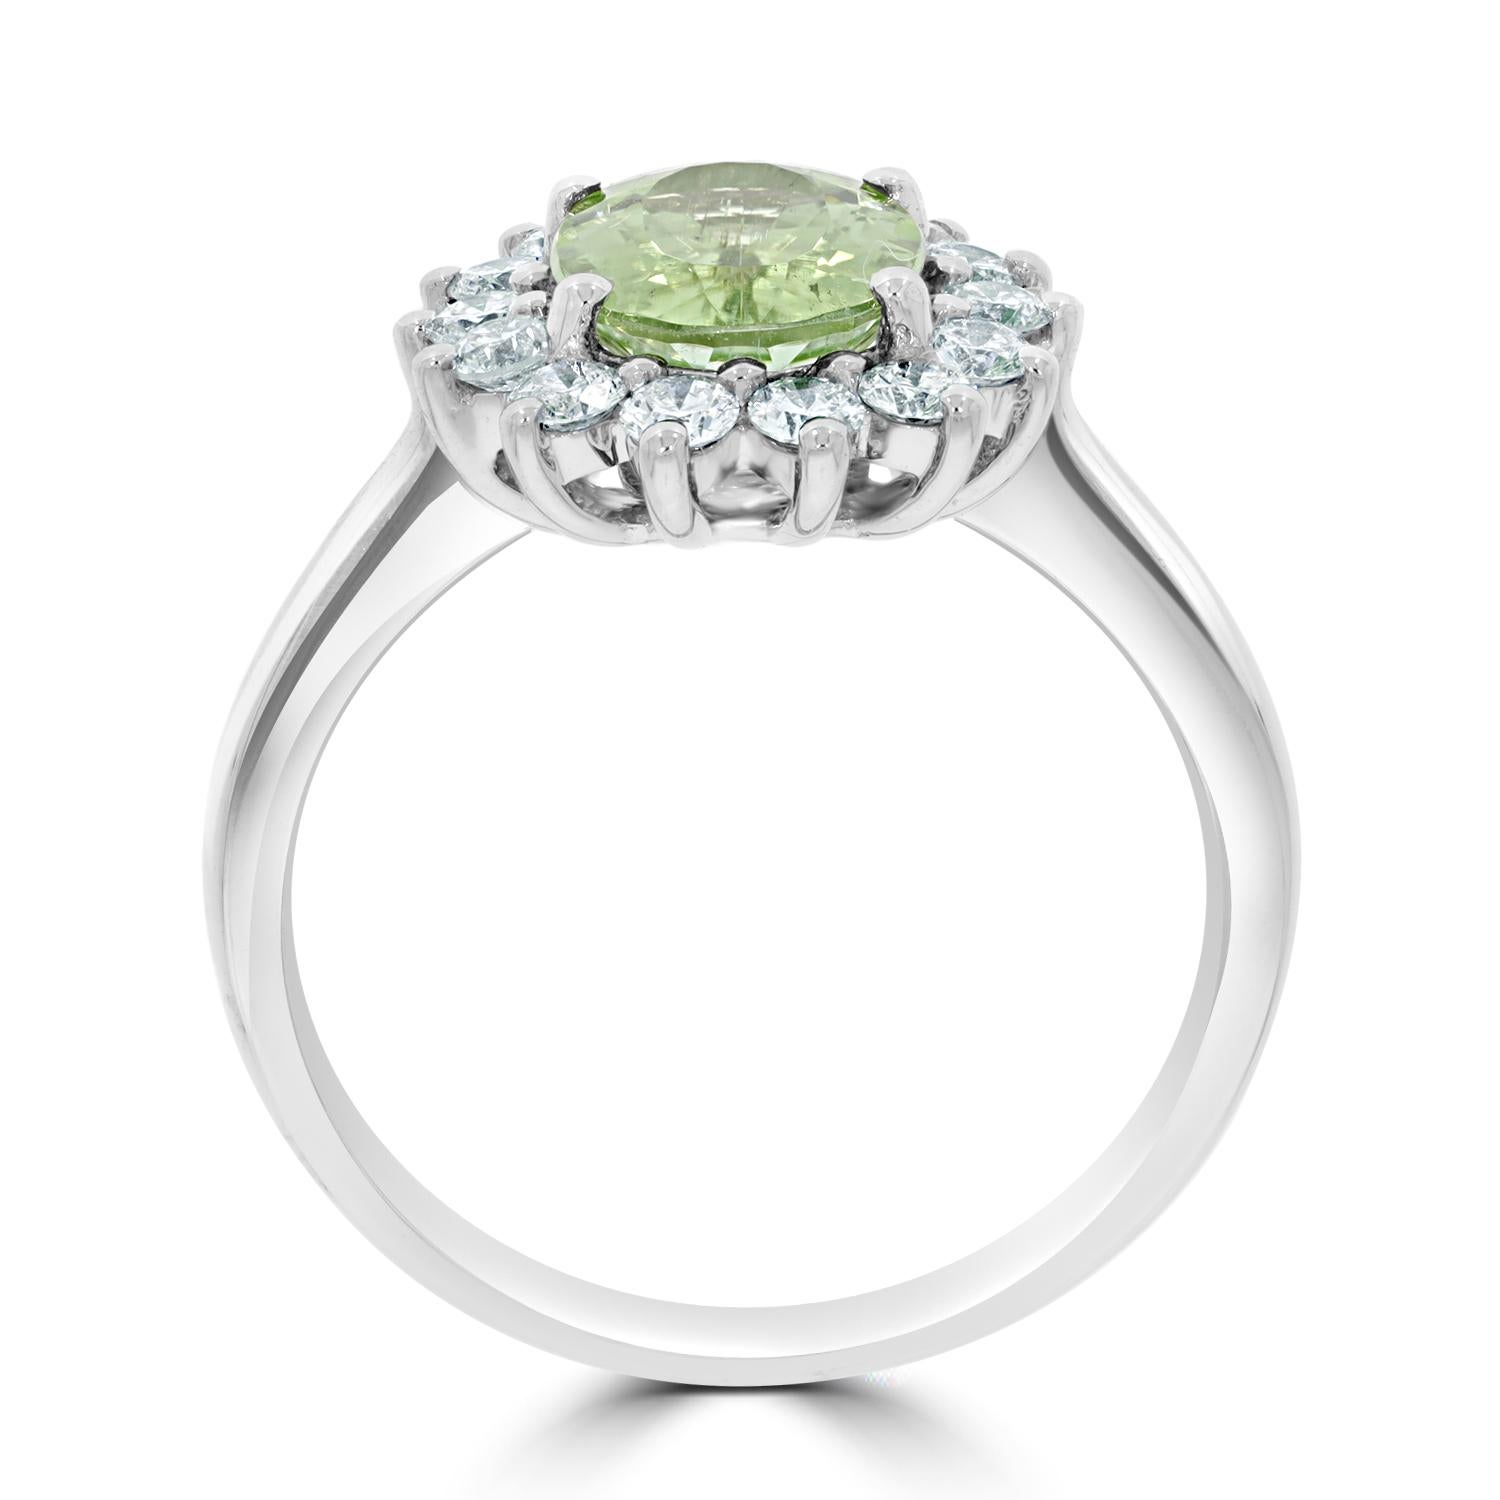 Introducing our stunning Nigerian Green Paraiba Tourmaline Ring, a true masterpiece that is sure to turn heads and capture attention. This exquisite ring features a 1.76-carat Nigerian Green Paraiba Tourmaline, expertly cut to showcase its stunning